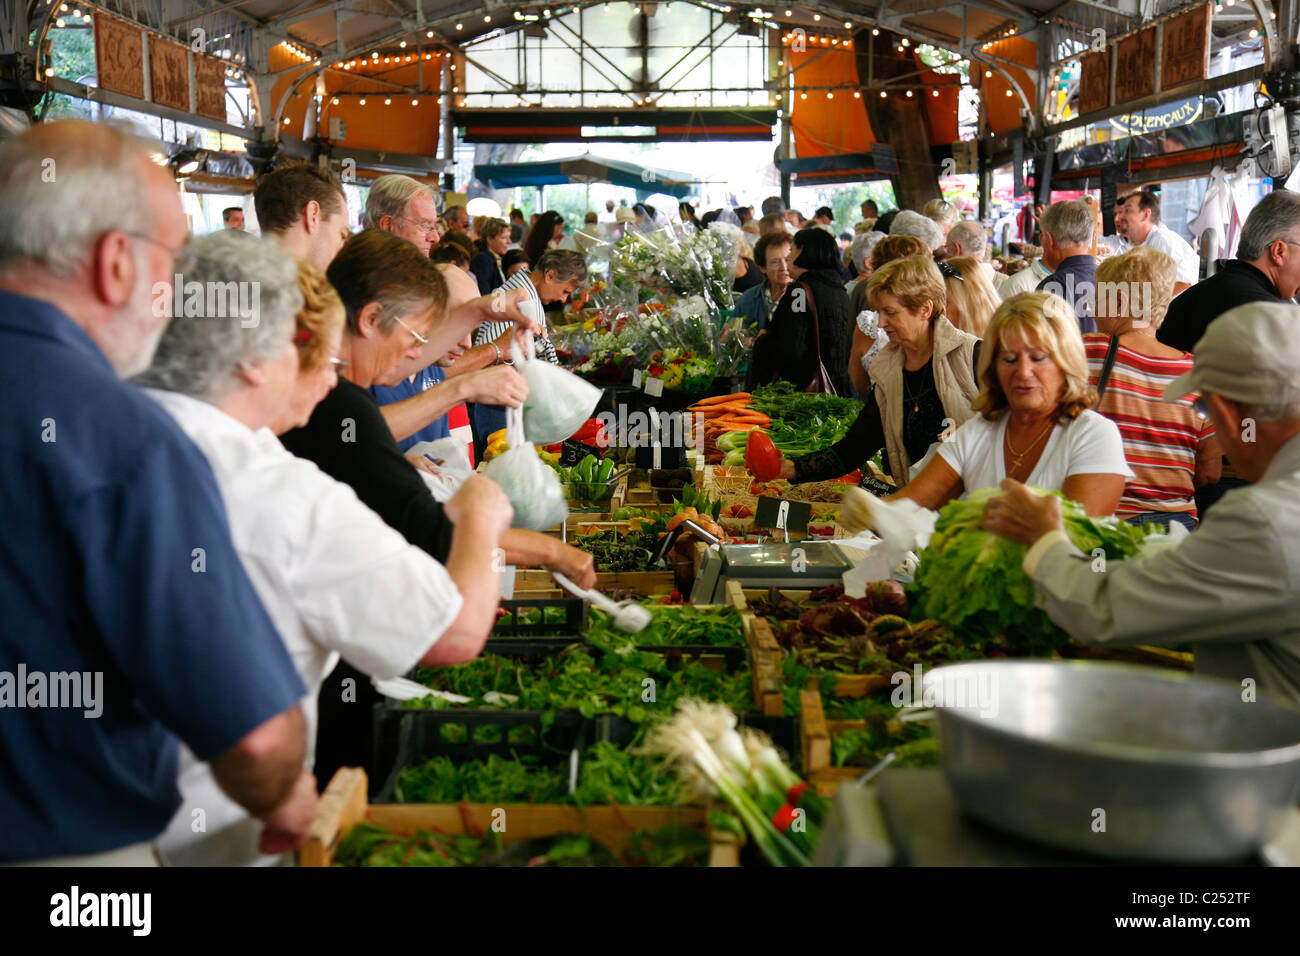 The Cours Massena market in the old town, Antibes, Alpes Maritimes, Provence, France. Stock Photo